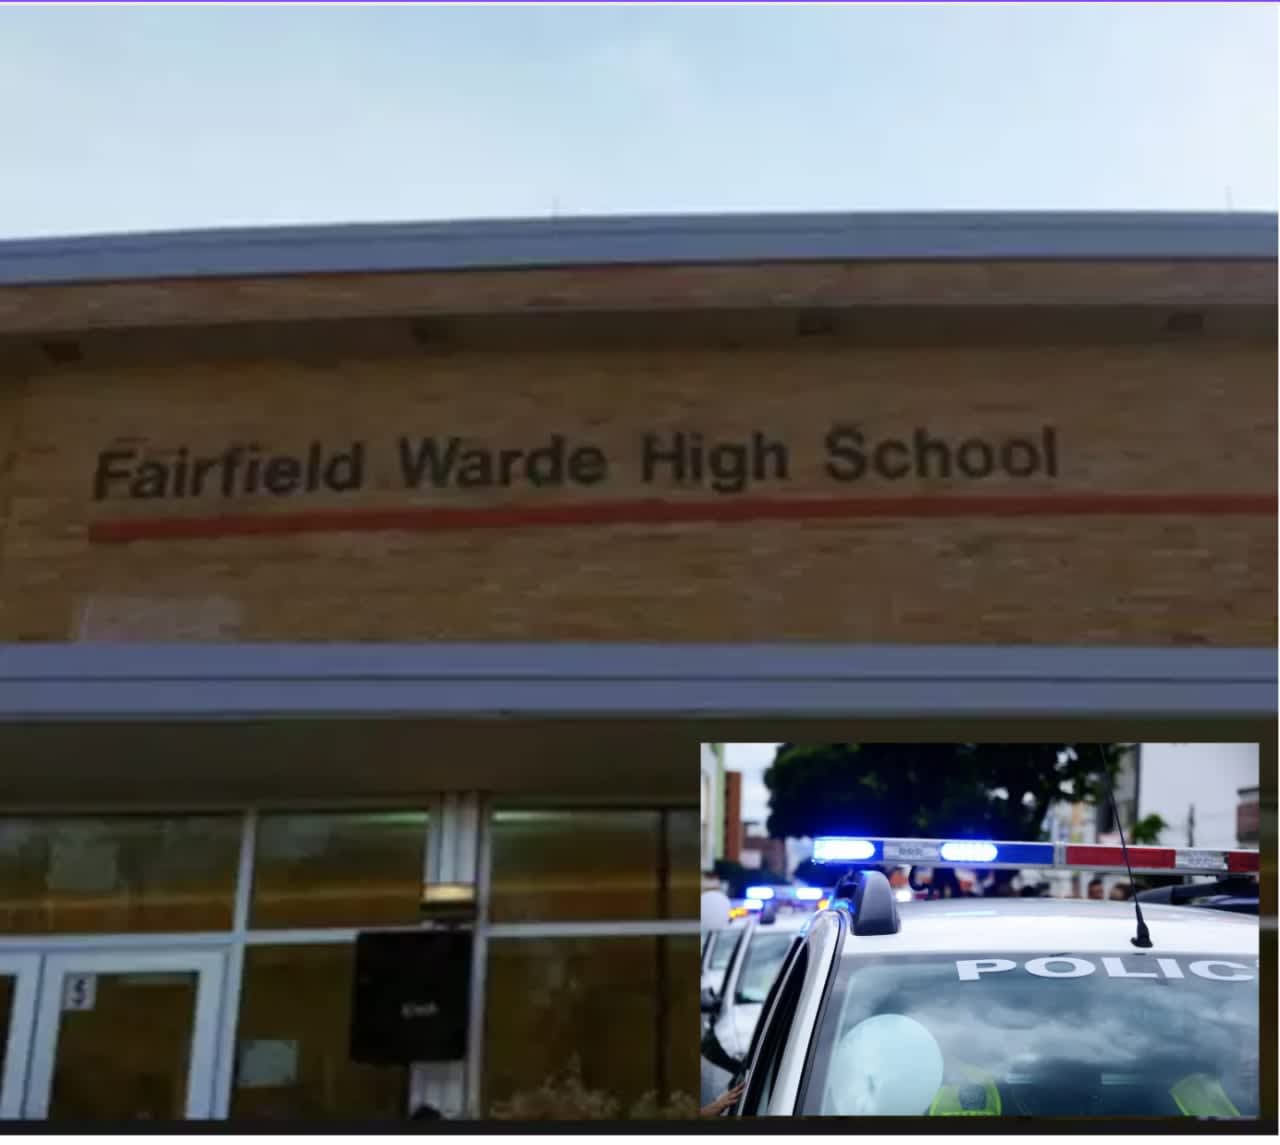 Two female students were arrested following a fight at a Fairfield high school that injured one.